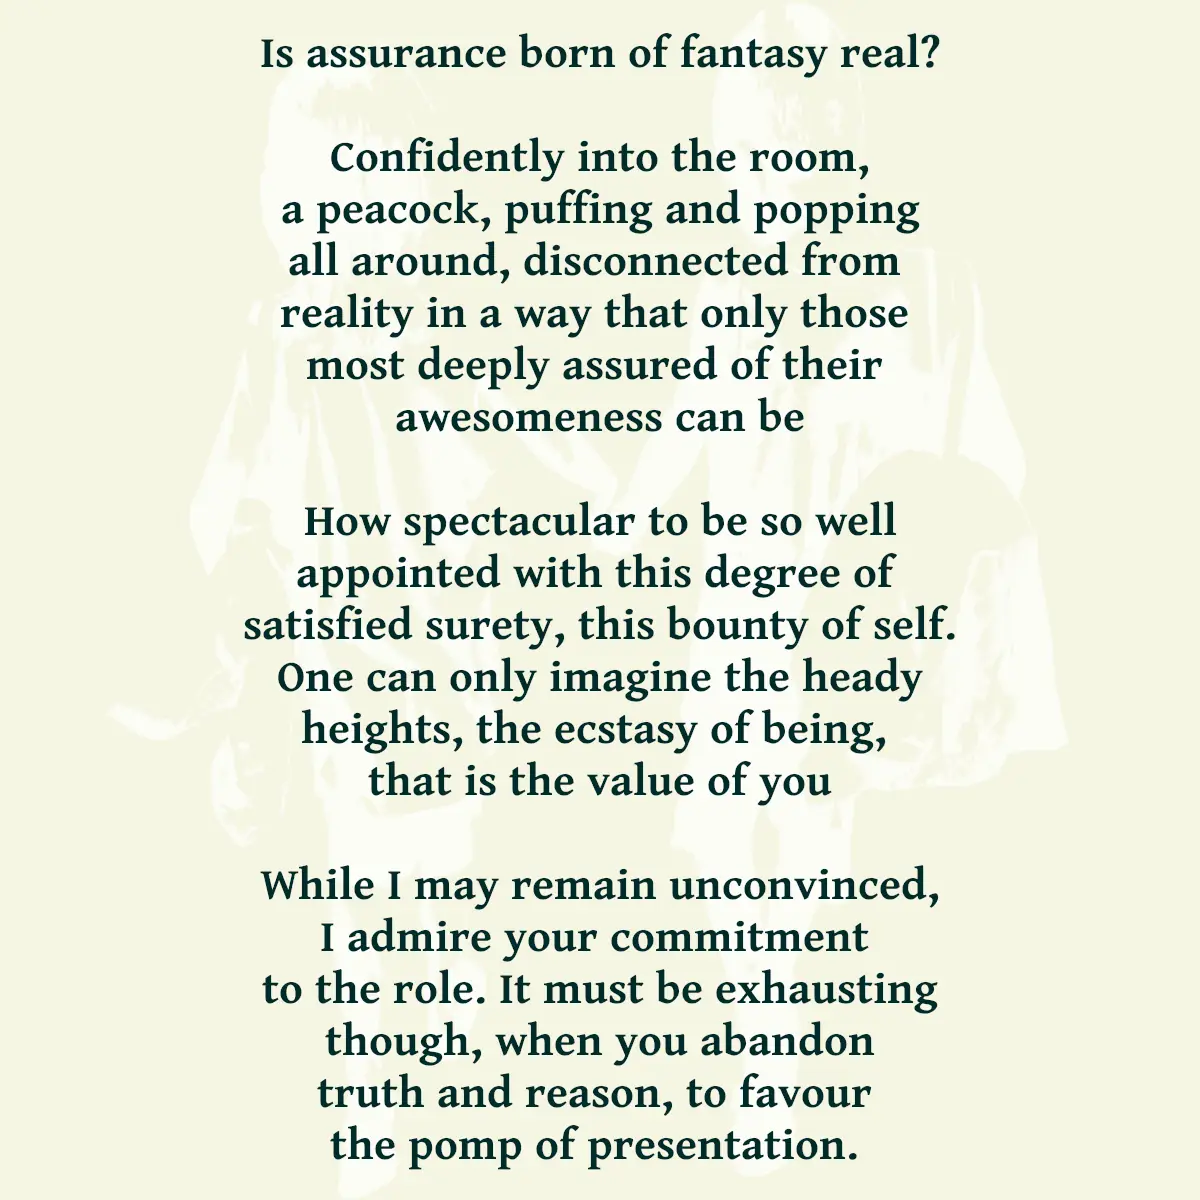 Is assurance born of fantasy real? Confidently into the room, a peacock, puffing and popping all around, disconnected from reality in a way that only those most deeply assured of their awesomeness can be How spectacular to be so well appointed with this degree of satisfied surety, this bounty of self. One can only imagine the heady heights, the ecstasy of being, that is the value of you While I may remain unconvinced, I admire your commitment to the role. It must be exhausting though, when you abandon truth and reason, to favour the pomp of presentation.